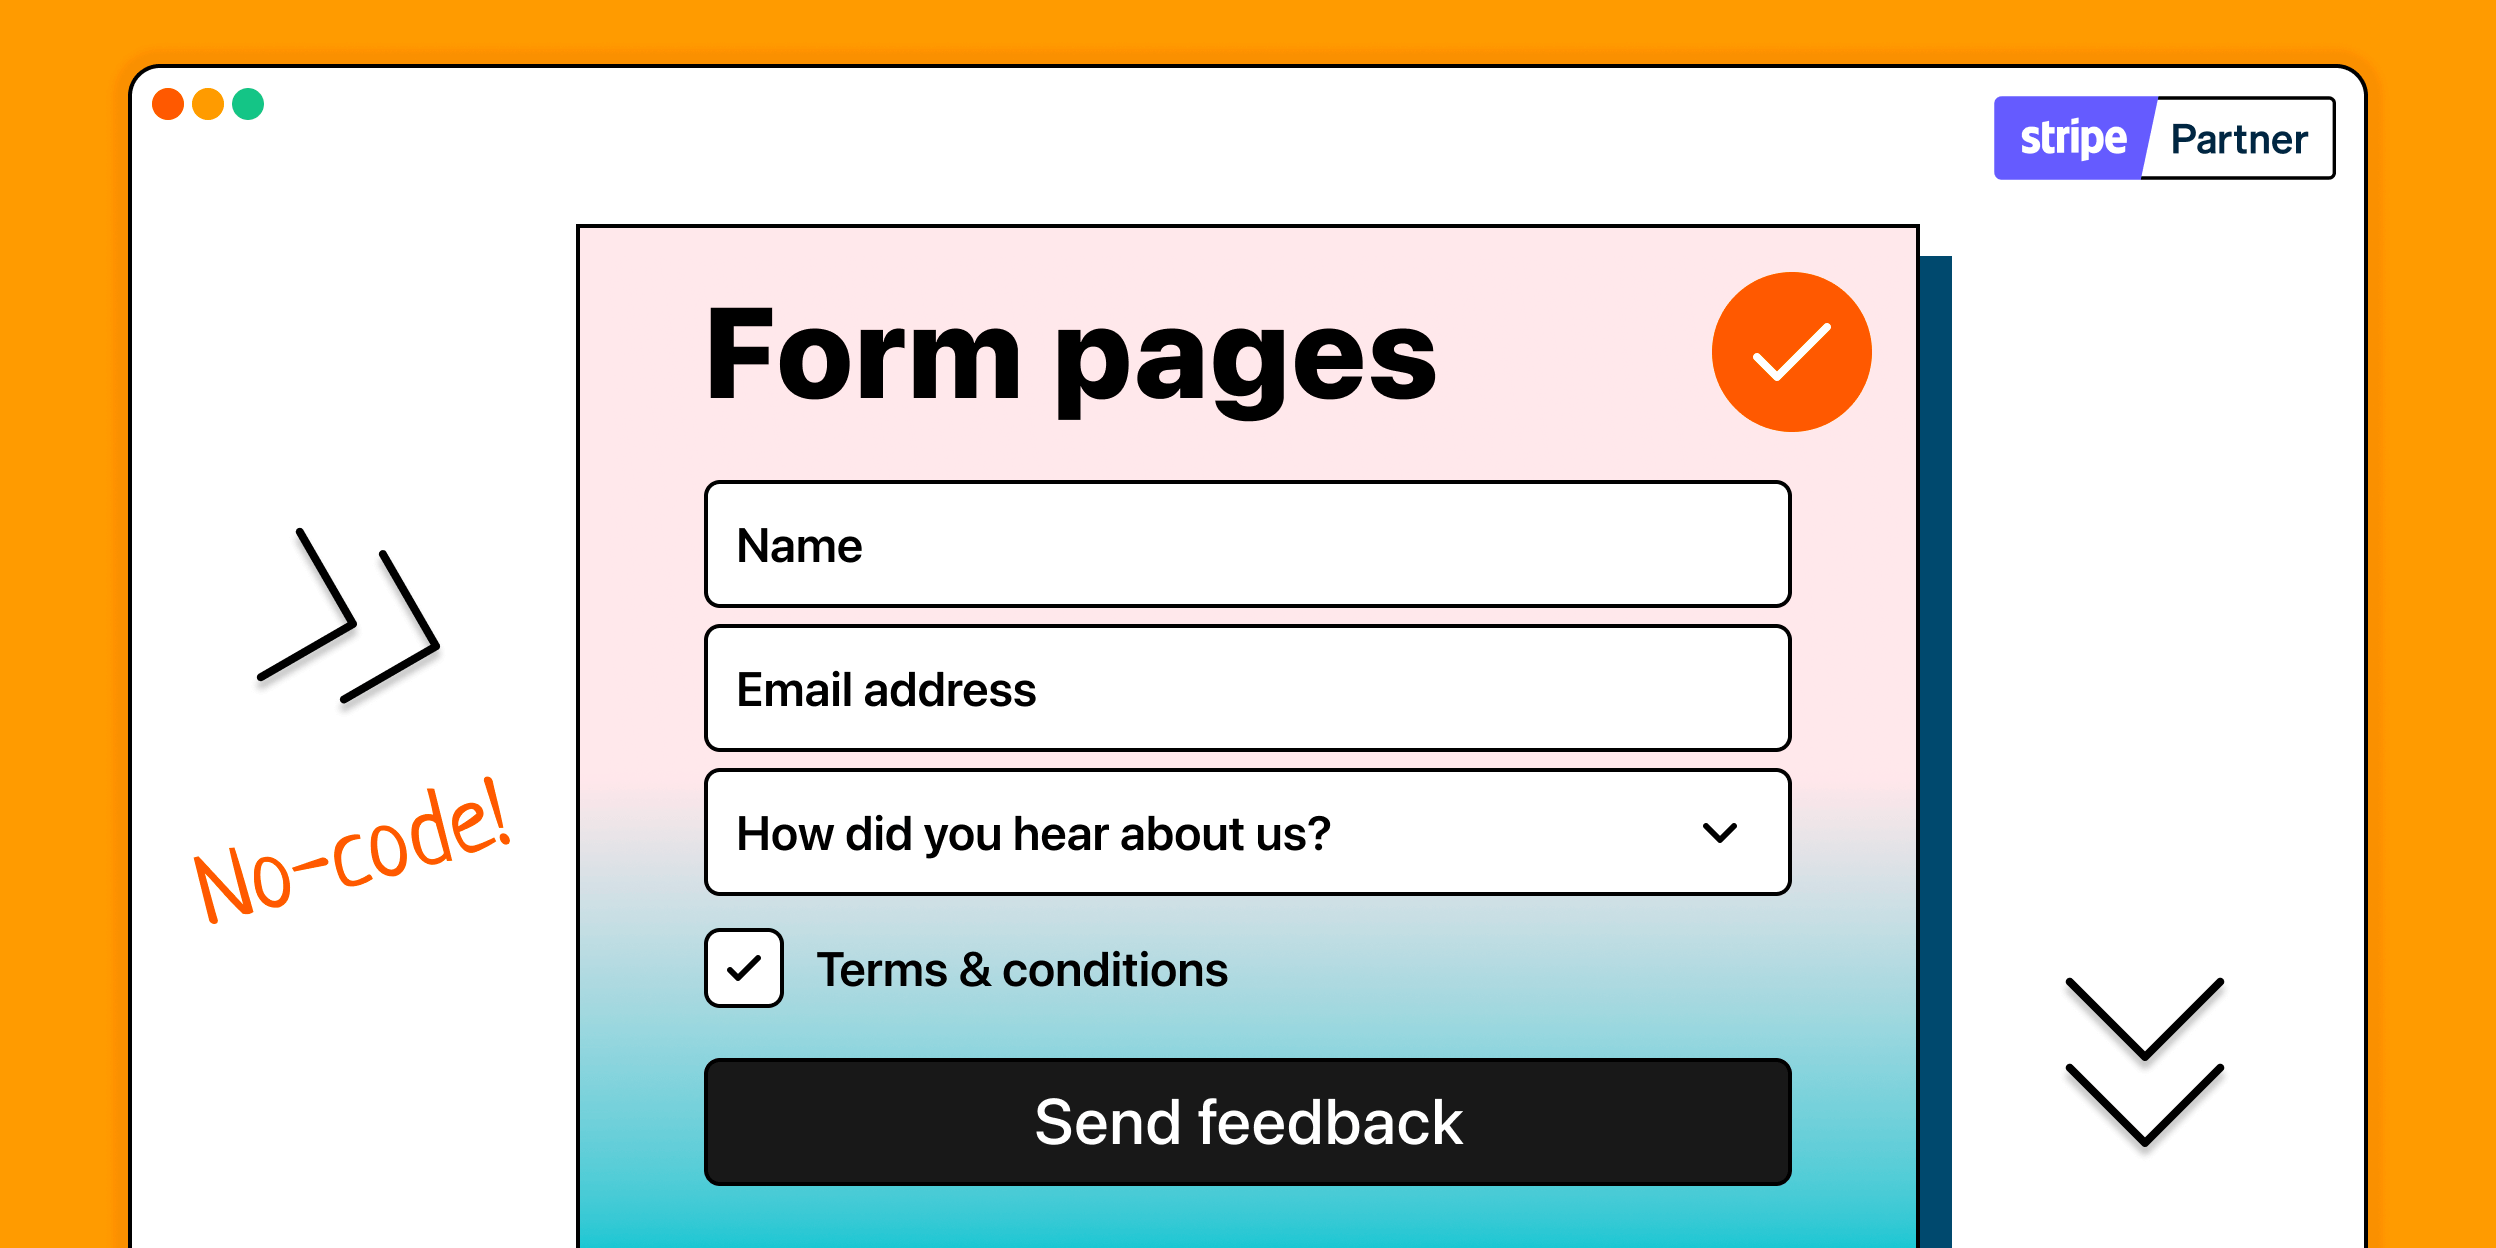 Introducing Form pages: a new way to capture leads, register guests and collect feedback